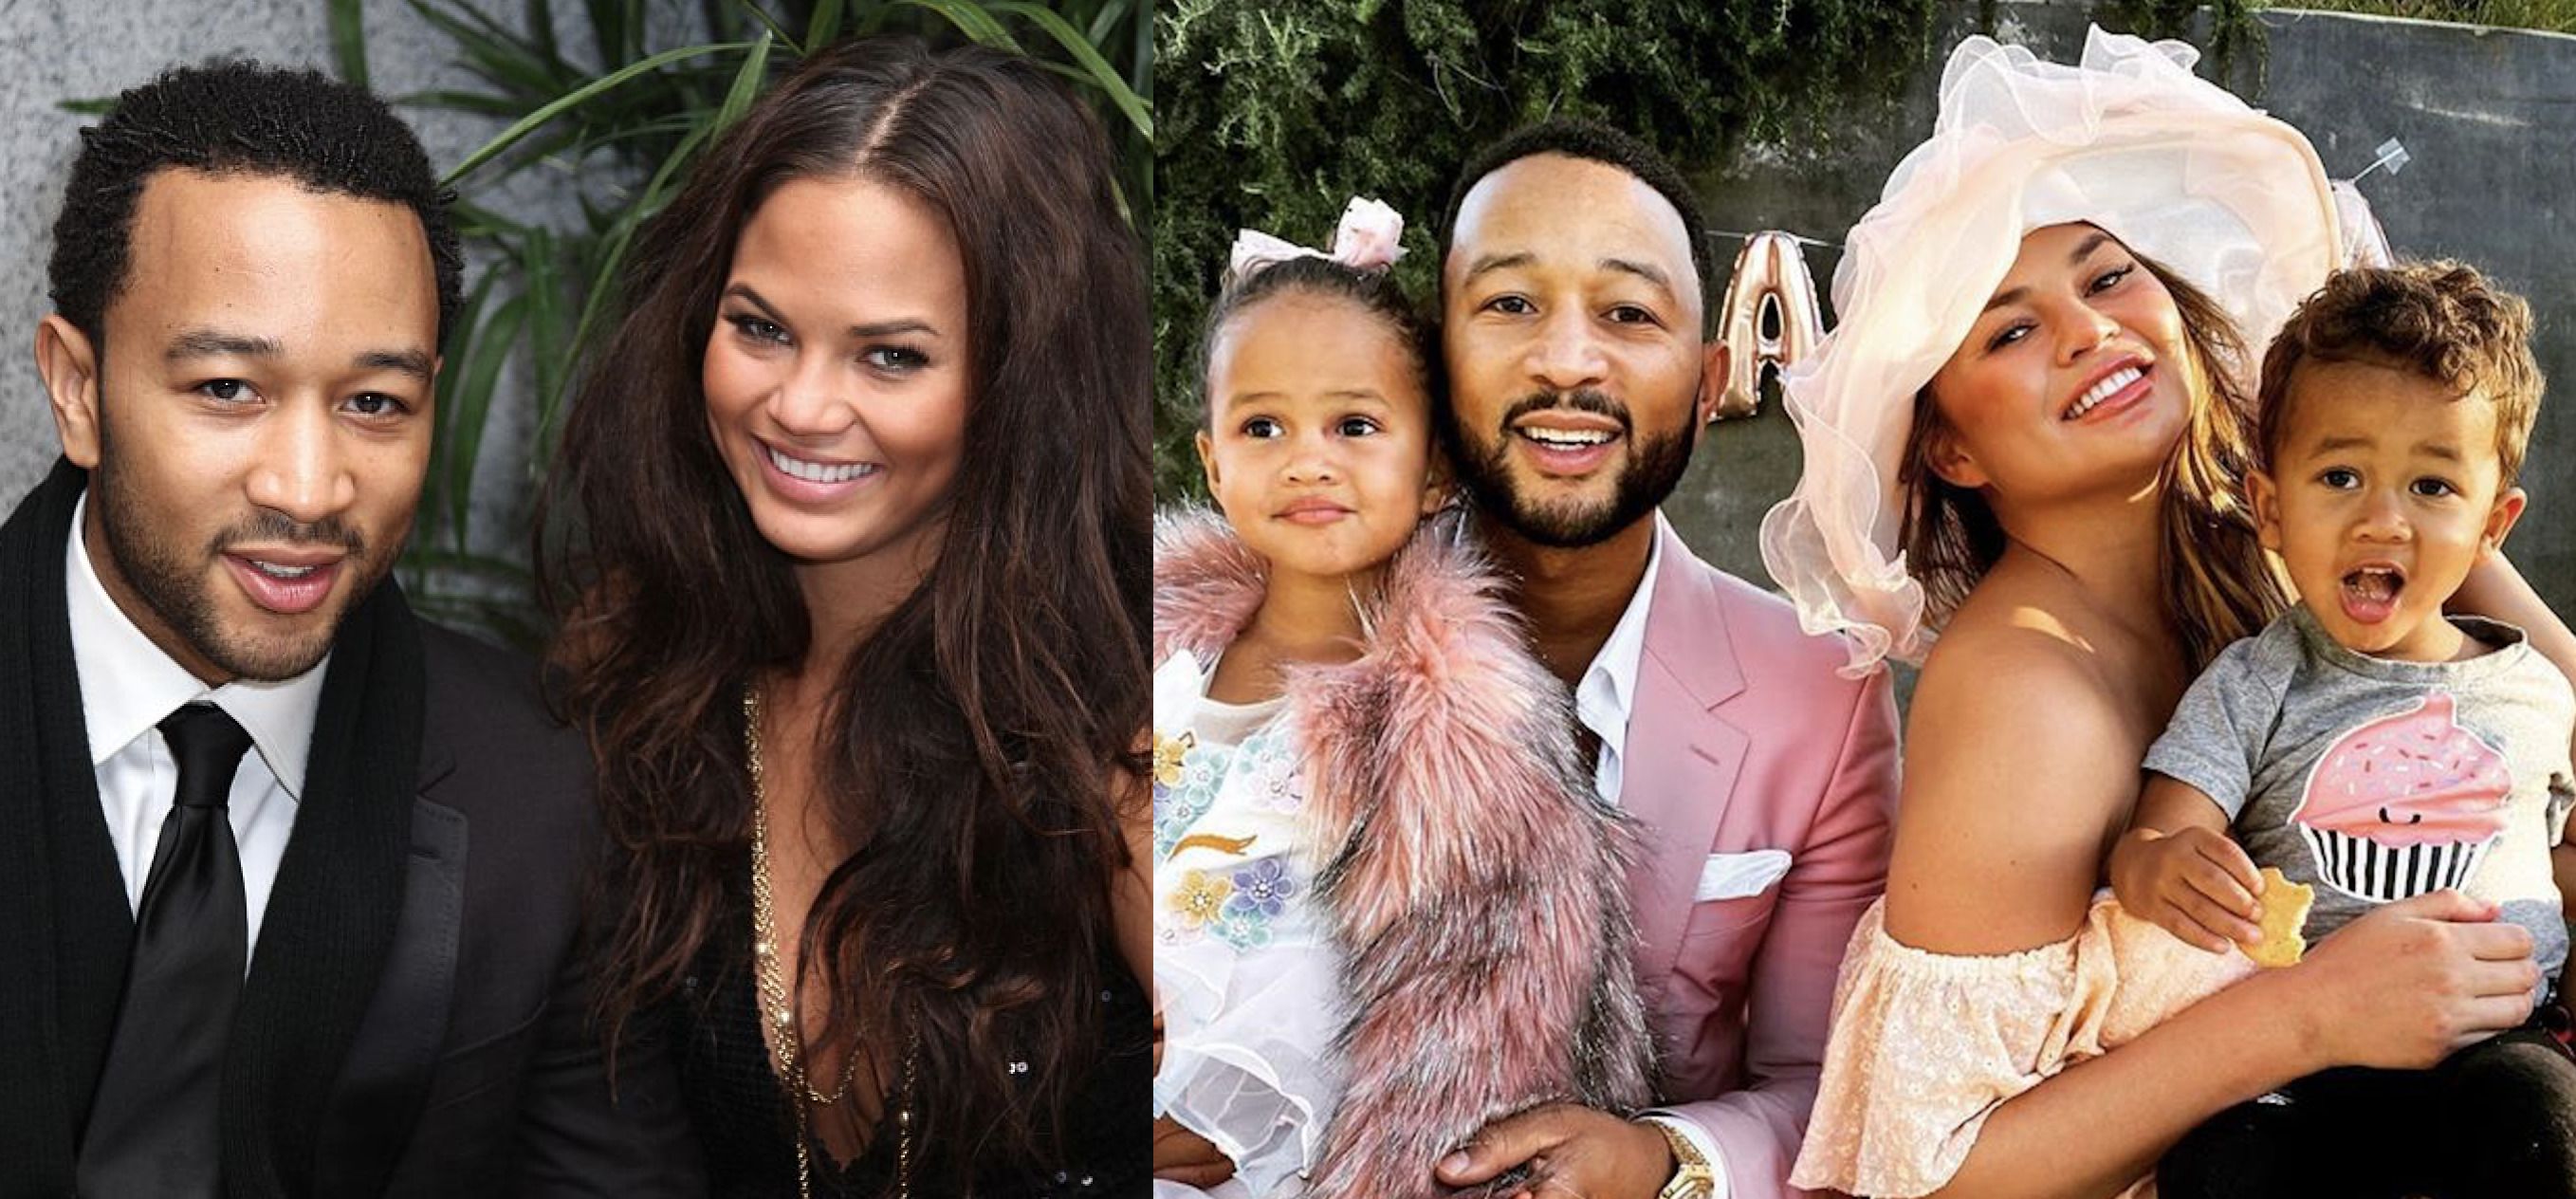 Who Is John Legend's Wife, Chrissy Teigen? - More About John Legend's Marriage and Kids